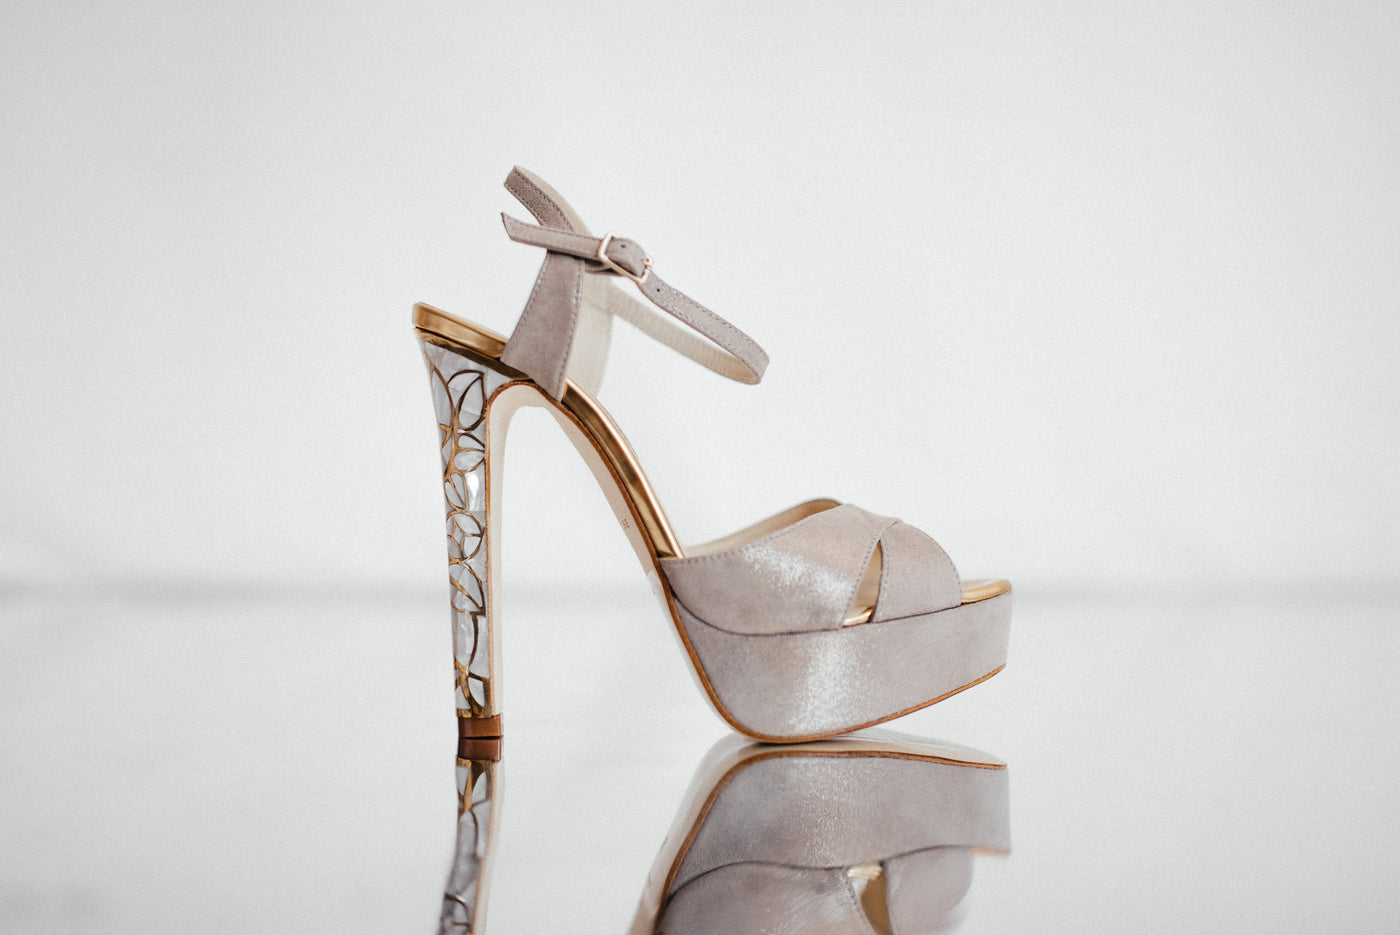 What Are the Go-To Wedding Shoes for a Romantic Rustic Wedding?